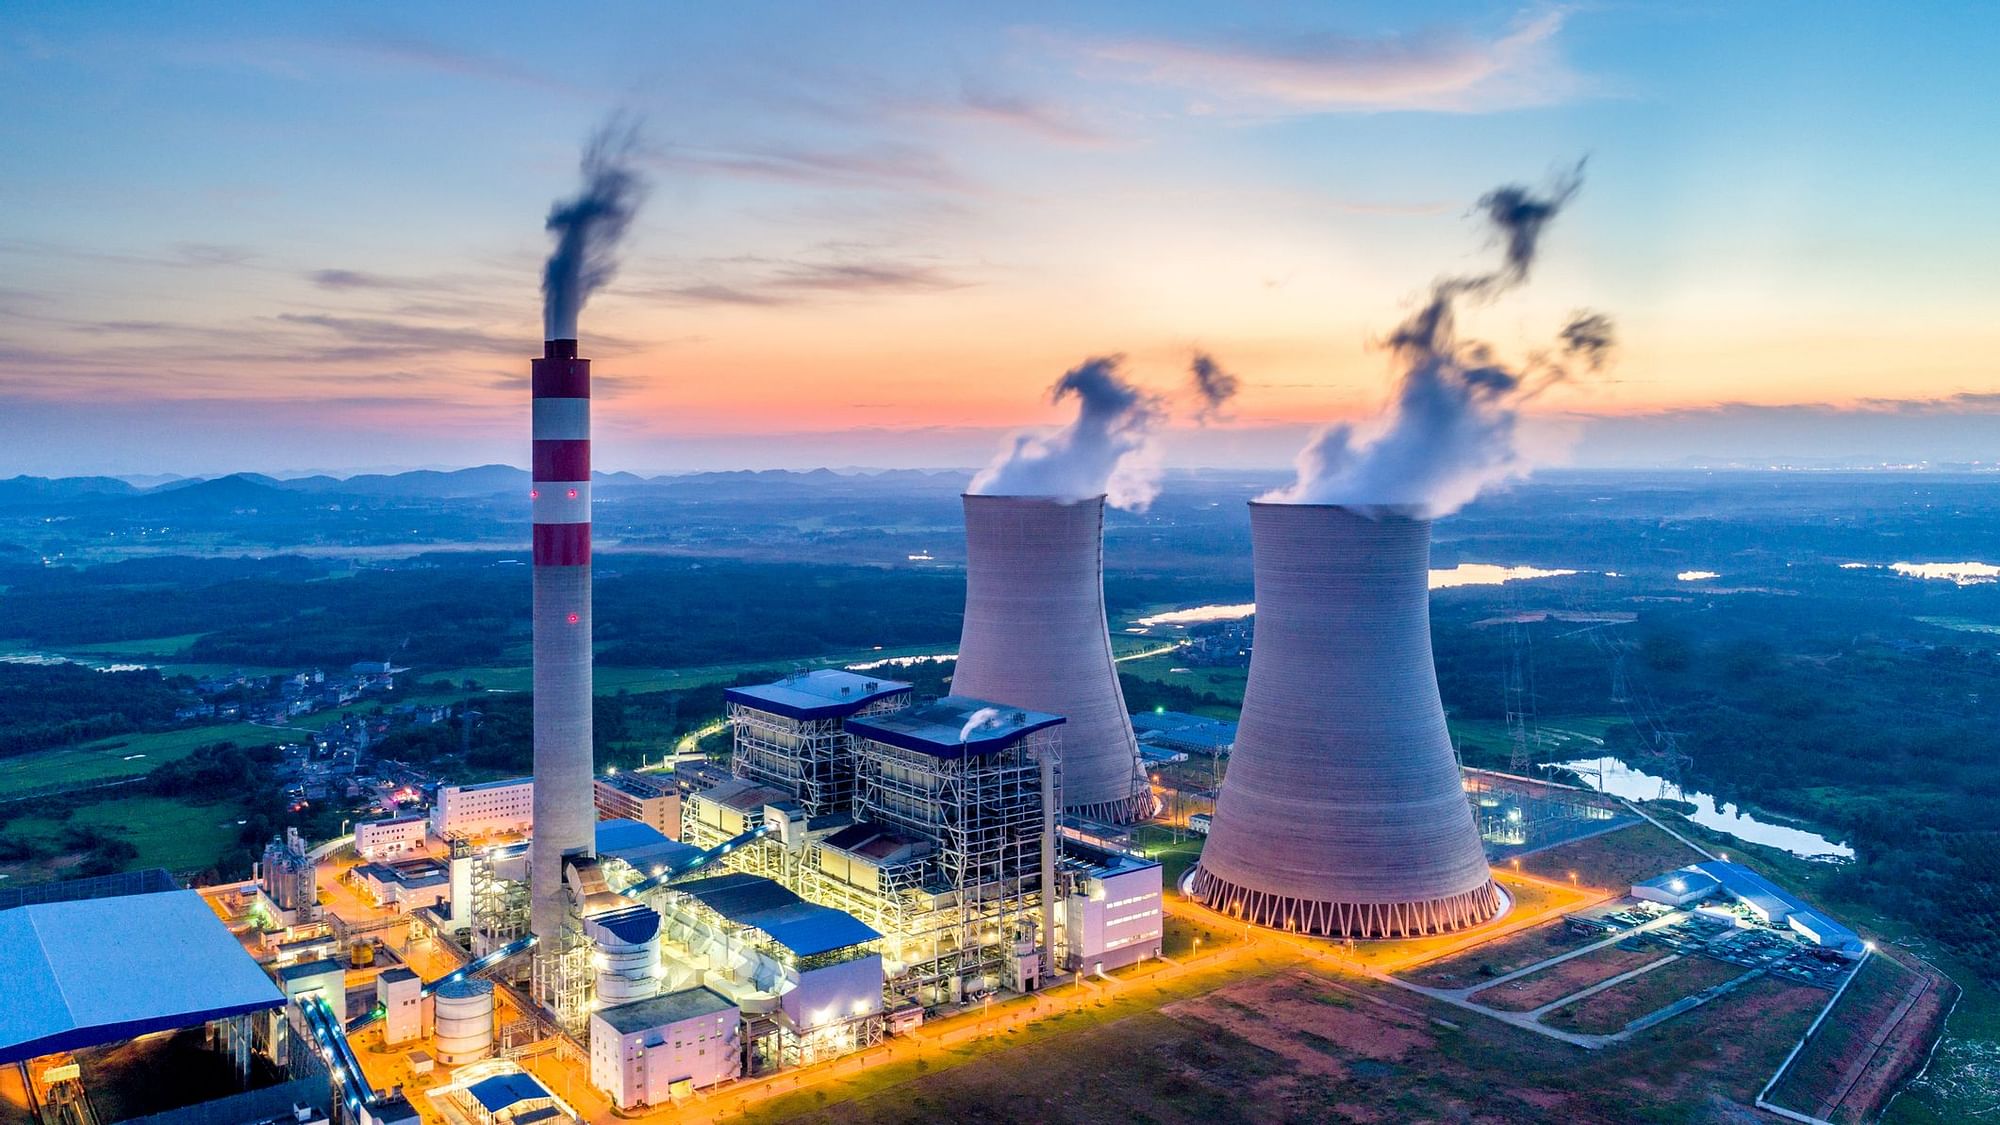 barely-regulated-thermal-power-plants-use-up-more-water-than-permitted